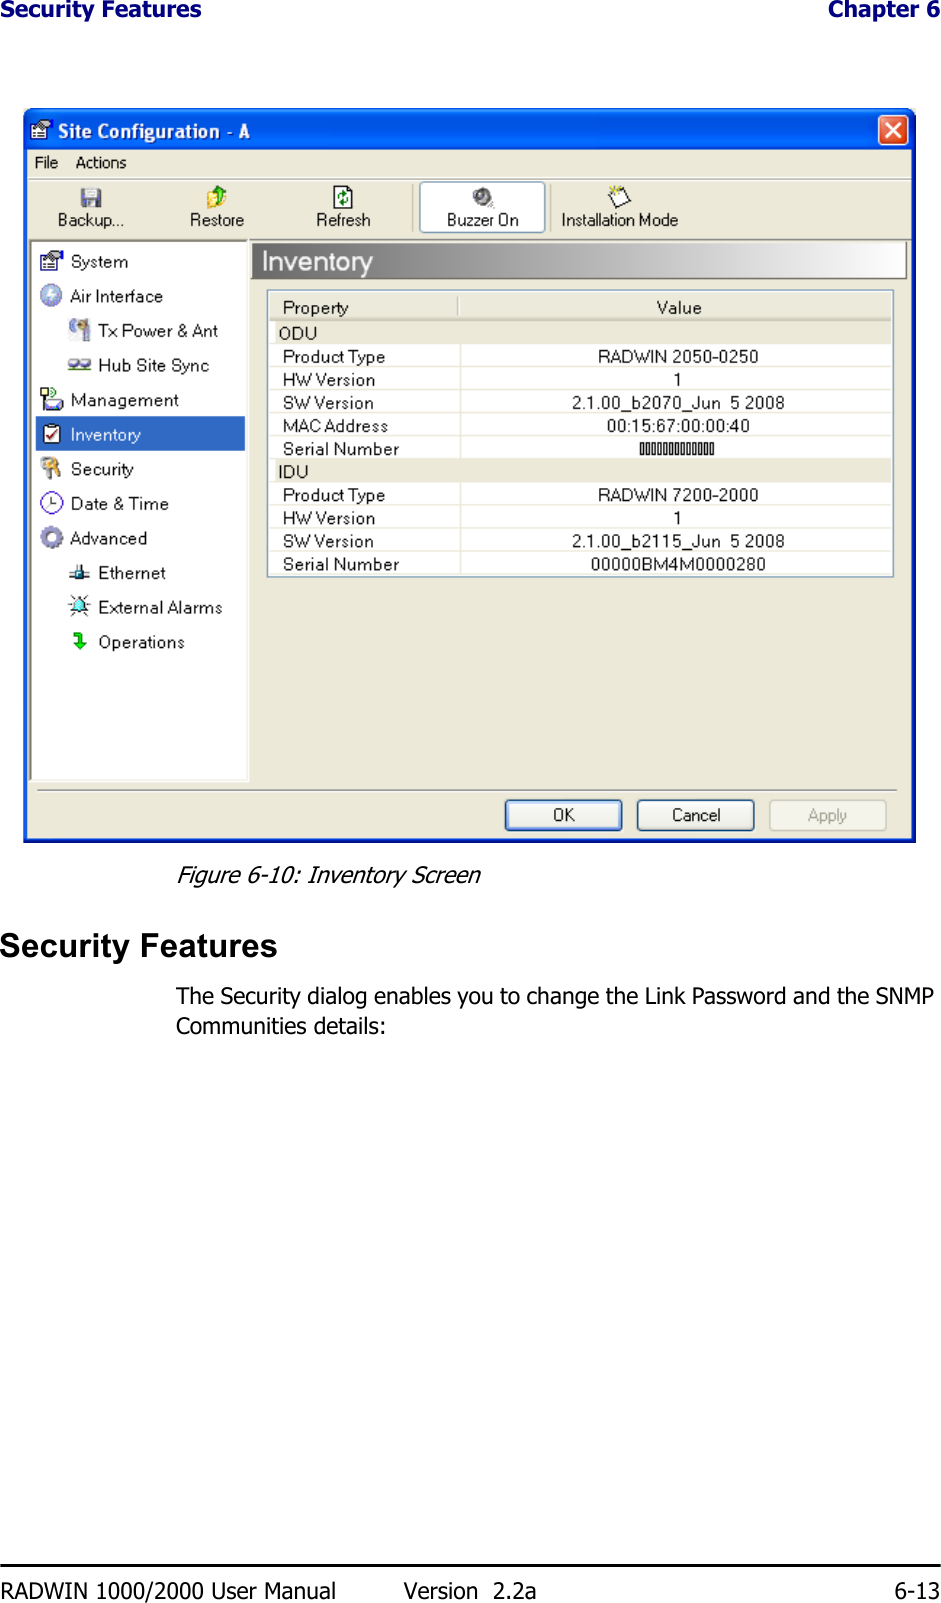 Security Features  Chapter 6RADWIN 1000/2000 User Manual Version  2.2a 6-13Figure 6-10: Inventory ScreenSecurity FeaturesThe Security dialog enables you to change the Link Password and the SNMP Communities details: